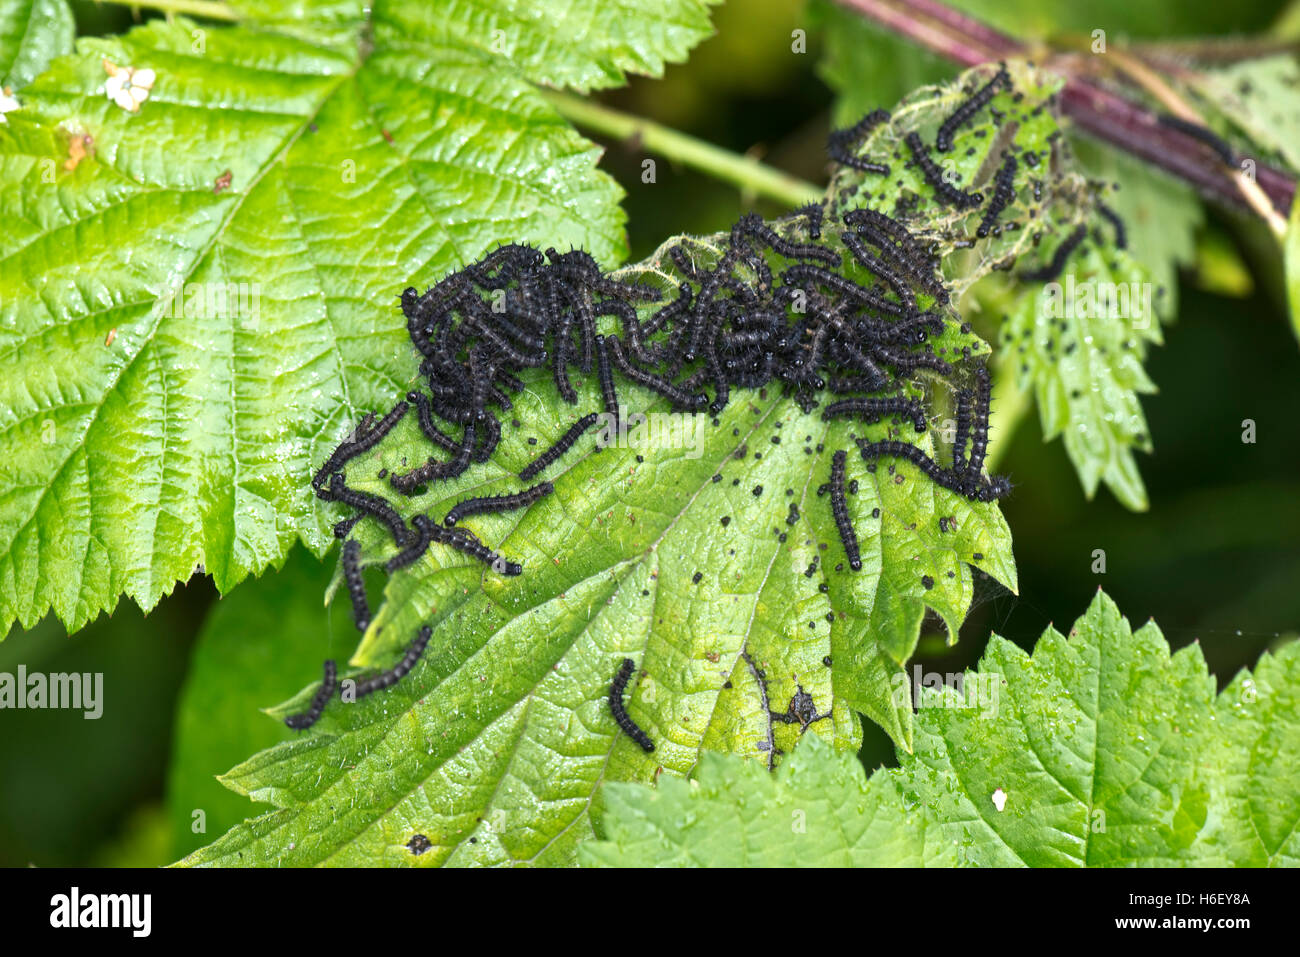 Peacock butterfly, Aglais io, caterpillars on stinging nettle leaves, Hampshire, June Stock Photo